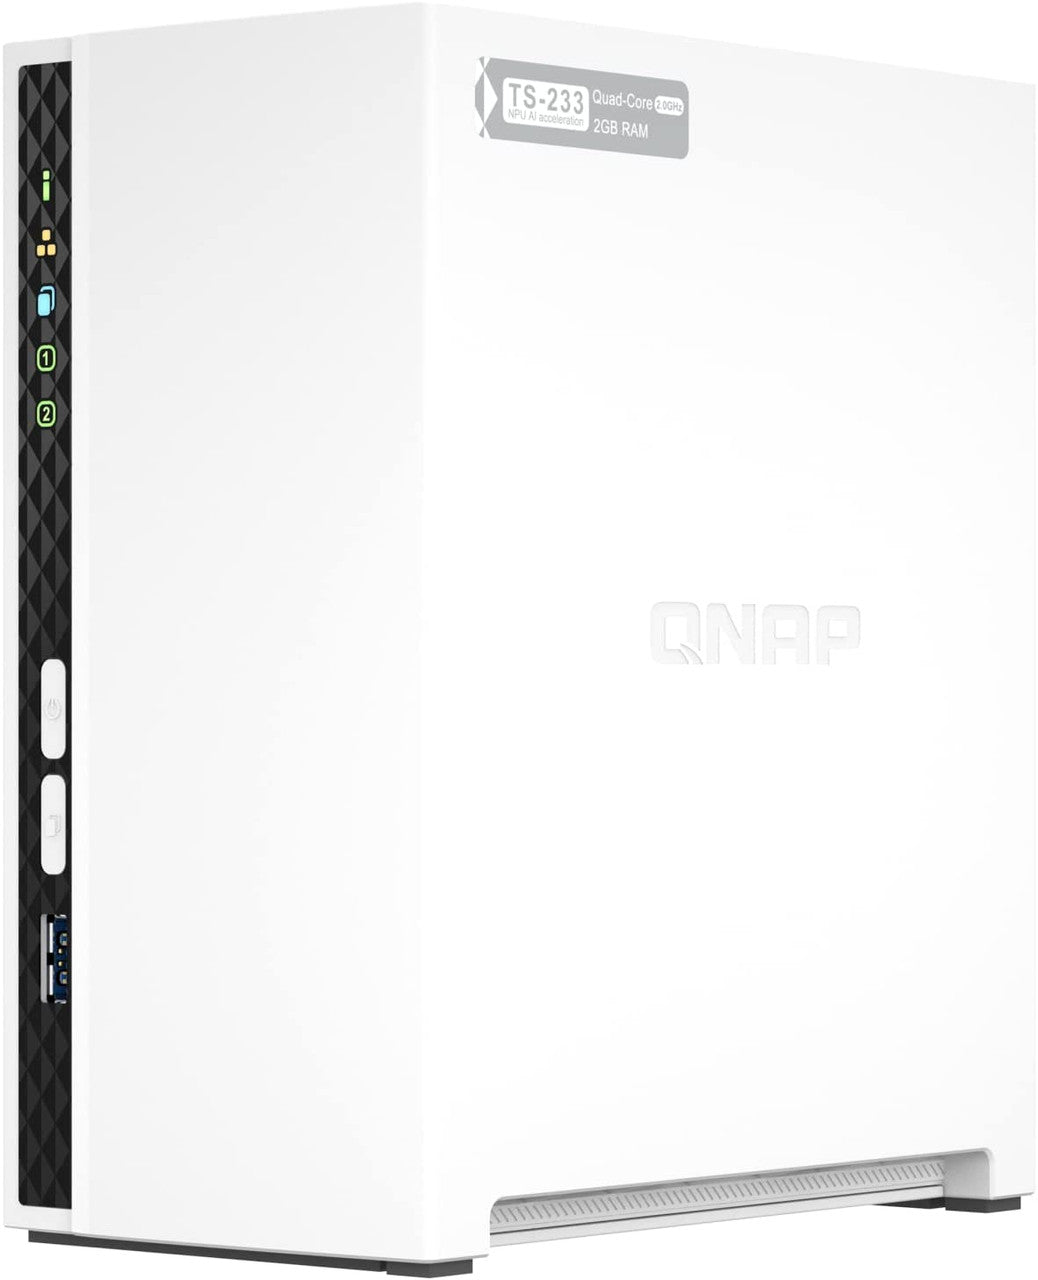 QNAP TS-233 2-Bay Desktop NAS with a 6TB (2 x 3TB) of Western Digital Red Plus Drives Fully Assembled and Tested